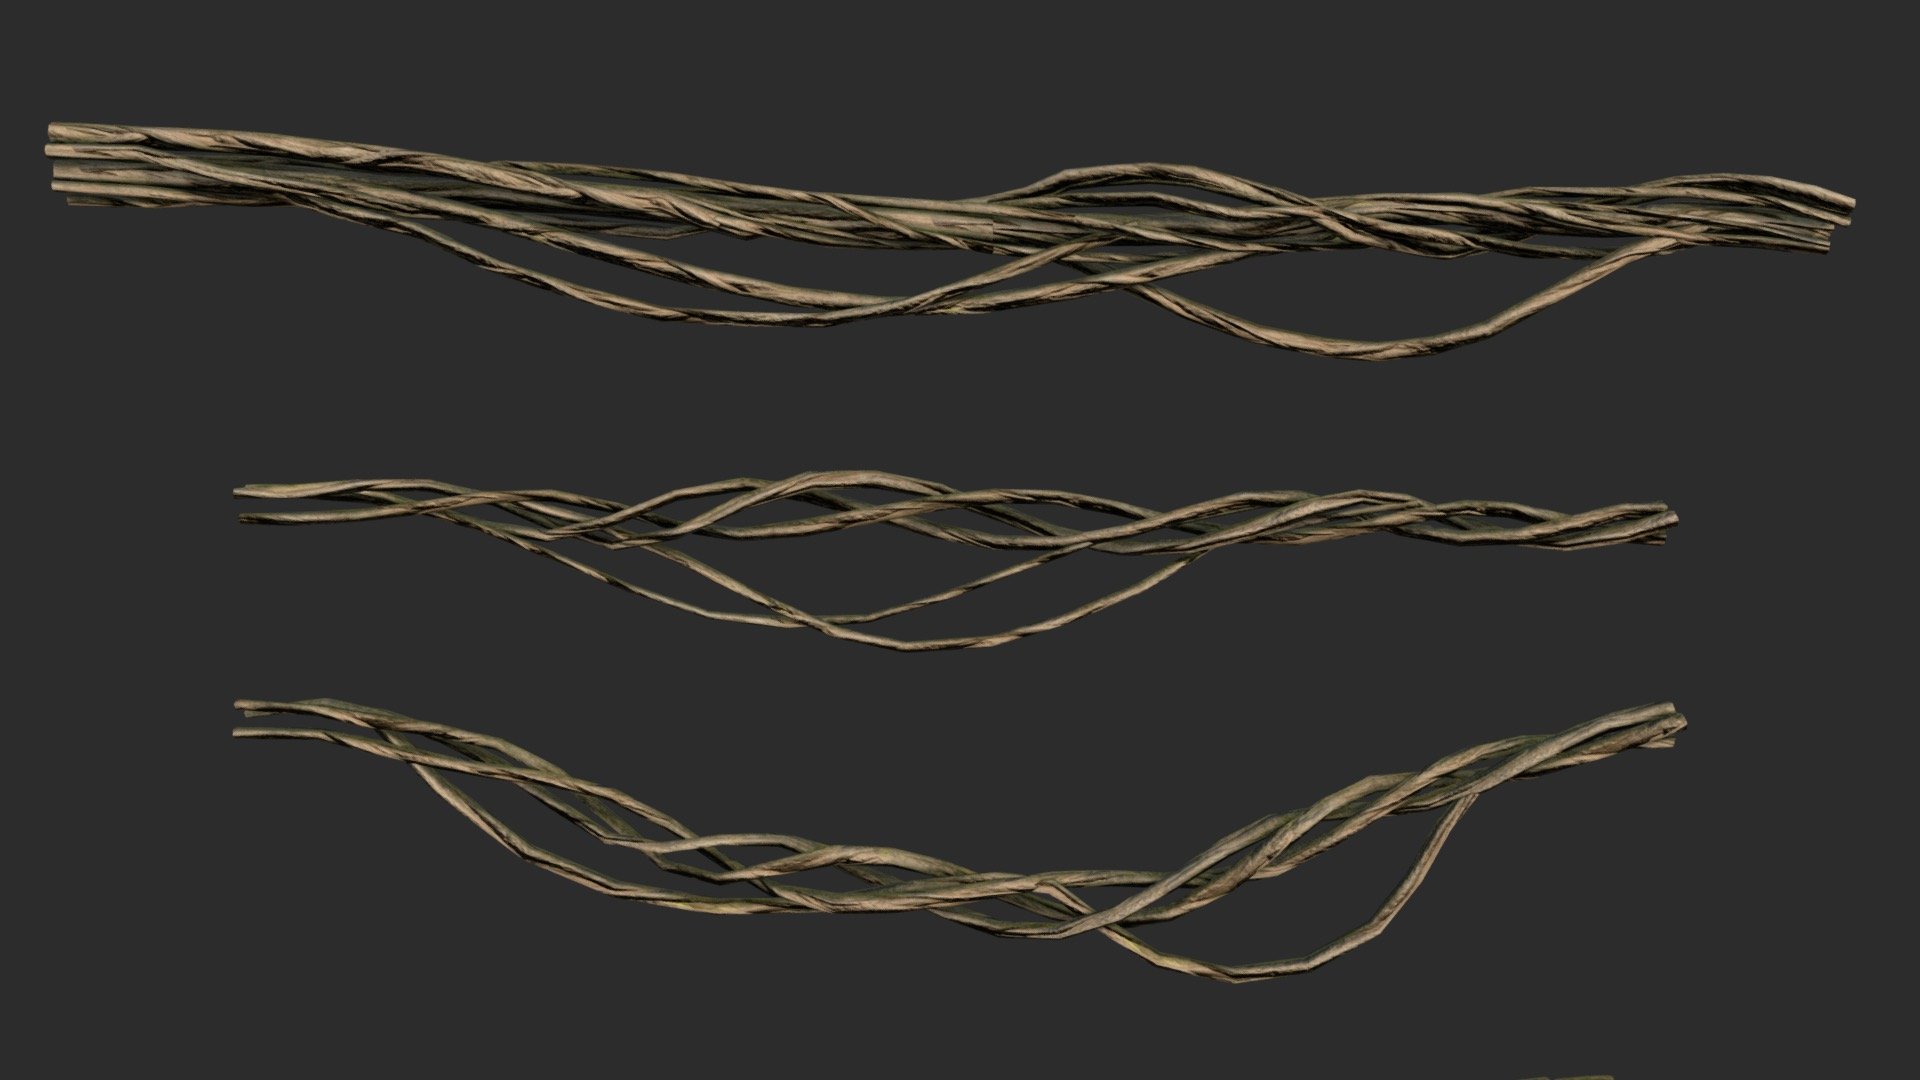 This root braided vines set is a game ready prop including 4 LODs and colliders for 4 individual objects.

This root jungle creepers set can be used in any forest or tropical environments.

The asset is available in realistic style and can be used in any game (post-apo, first person shooter, GTA like, adventure… ). All objects share a unique material for the best optimization for games.

Those AAA game assets of roots will embellish you scene and add more details which can help the gameplay and the game-design.

Low-poly model &amp; Blender native 3.0

SPECIFICATIONS


Objects : 4
Polygons : 3508
Render engine : Eevee (Cycles ready)

GAME SPECS


LODs : Yes (inside FBX for Unity &amp; Unreal)
Numbers of LODs : 4
Collider : Yes

EXPORTED FORMATS


FBX
Collada
OBJ

TEXTURES


Materials in scene : 1
Textures sizes : 4K
Textures types : Base Color, Metallic, Roughness, Normal (DirectX &amp; OpenGL), Heigh &amp; AO (also Unity &amp; Unreal ARM workflow maps)
Textures format : PNG
 - Root braided Vines Set - Buy Royalty Free 3D model by KangaroOz 3D (@KangaroOz-3D) 3d model